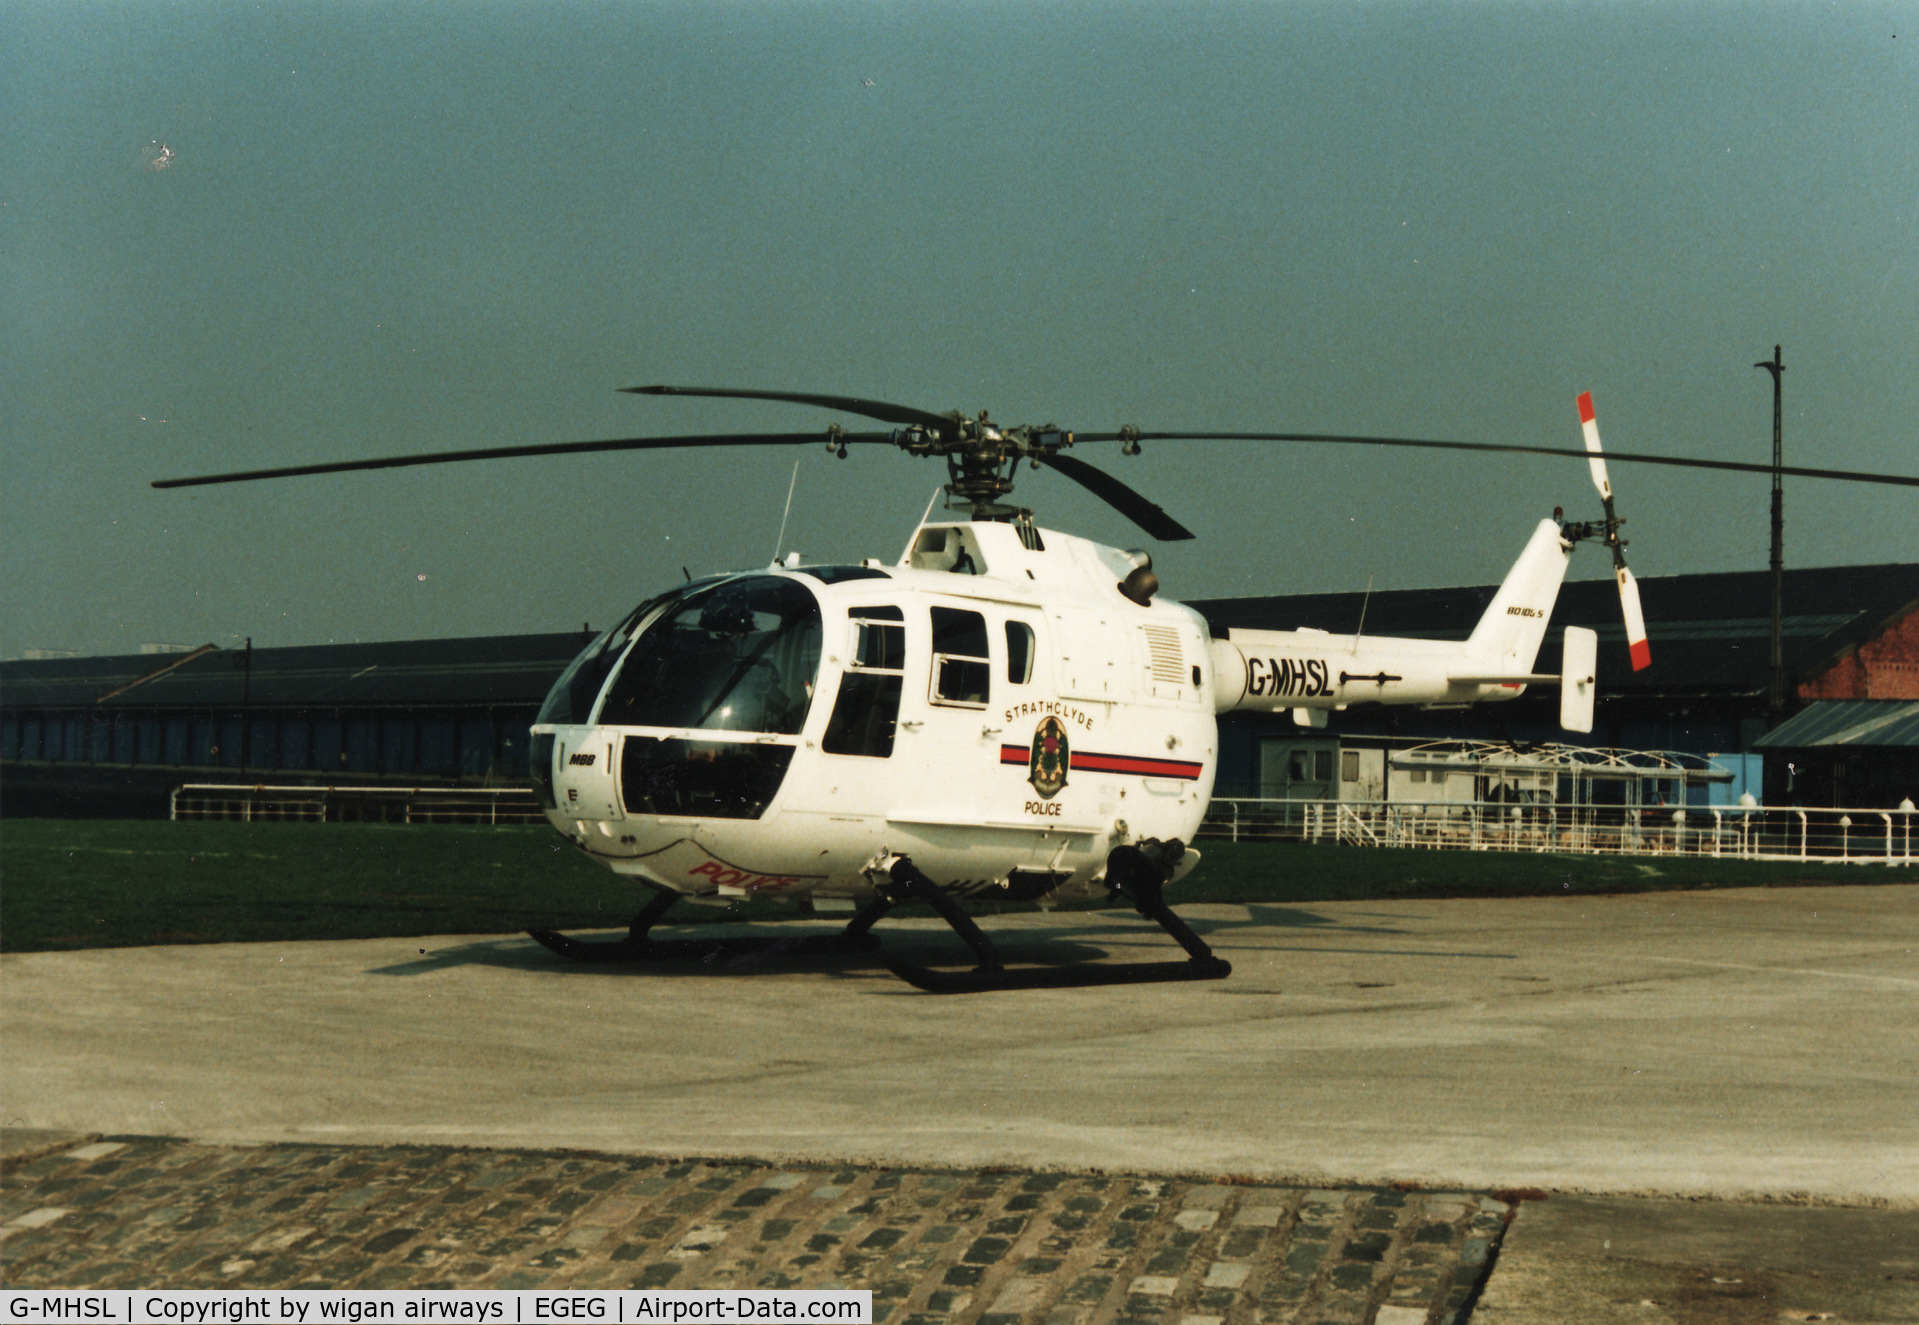 G-MHSL, 1990 MBB Bo.105DBS-4 C/N S-819, in service with the Strathclyde Police